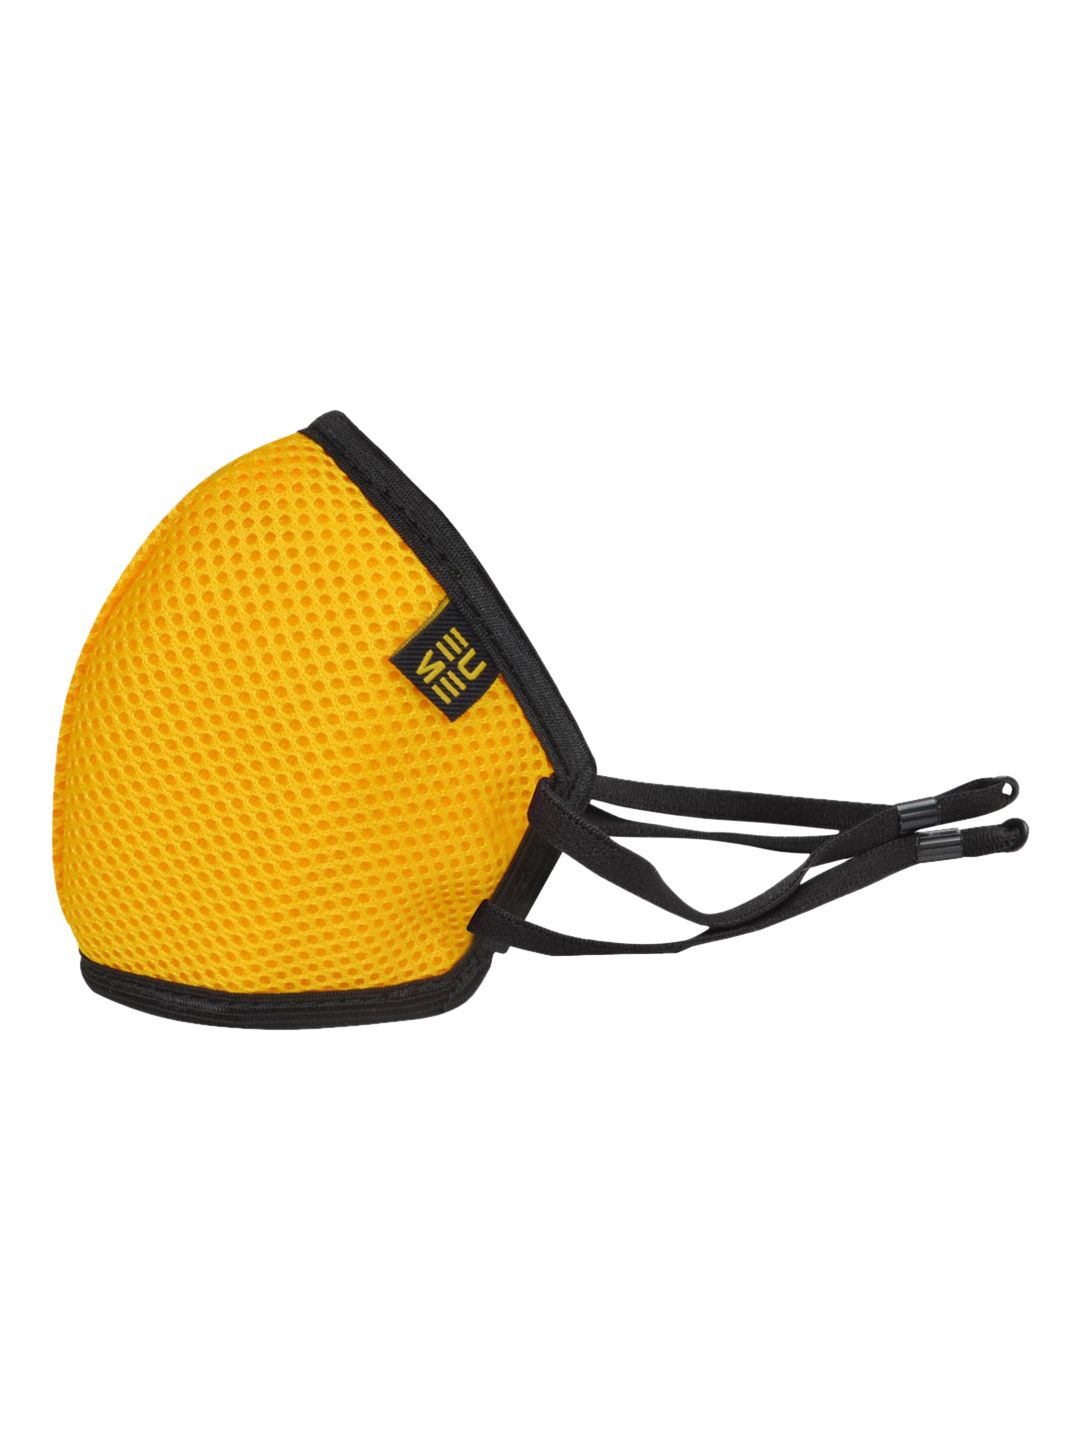 EUME Unisex Yellow Solid 3-Ply Reusable Protective Outdoor Masks Price in India